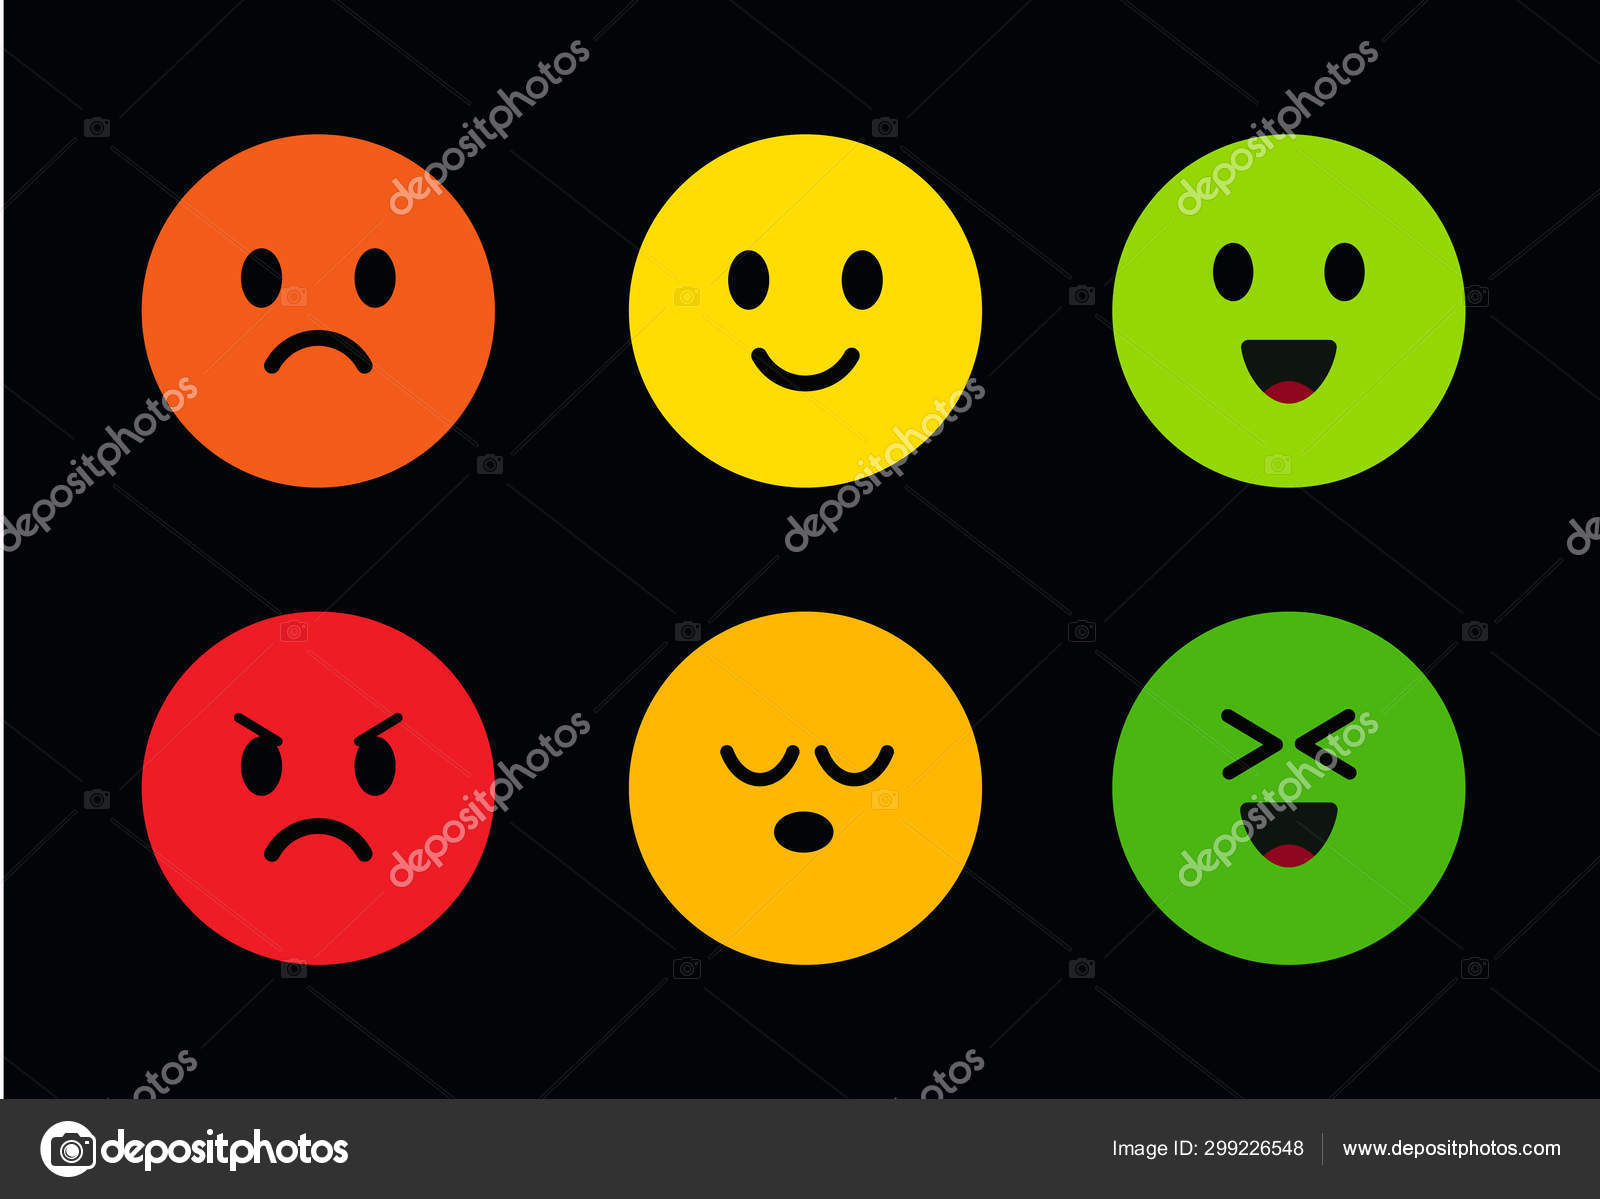 Multi-colored round cute faces with different facial expressions. Icons of  face with different moods from